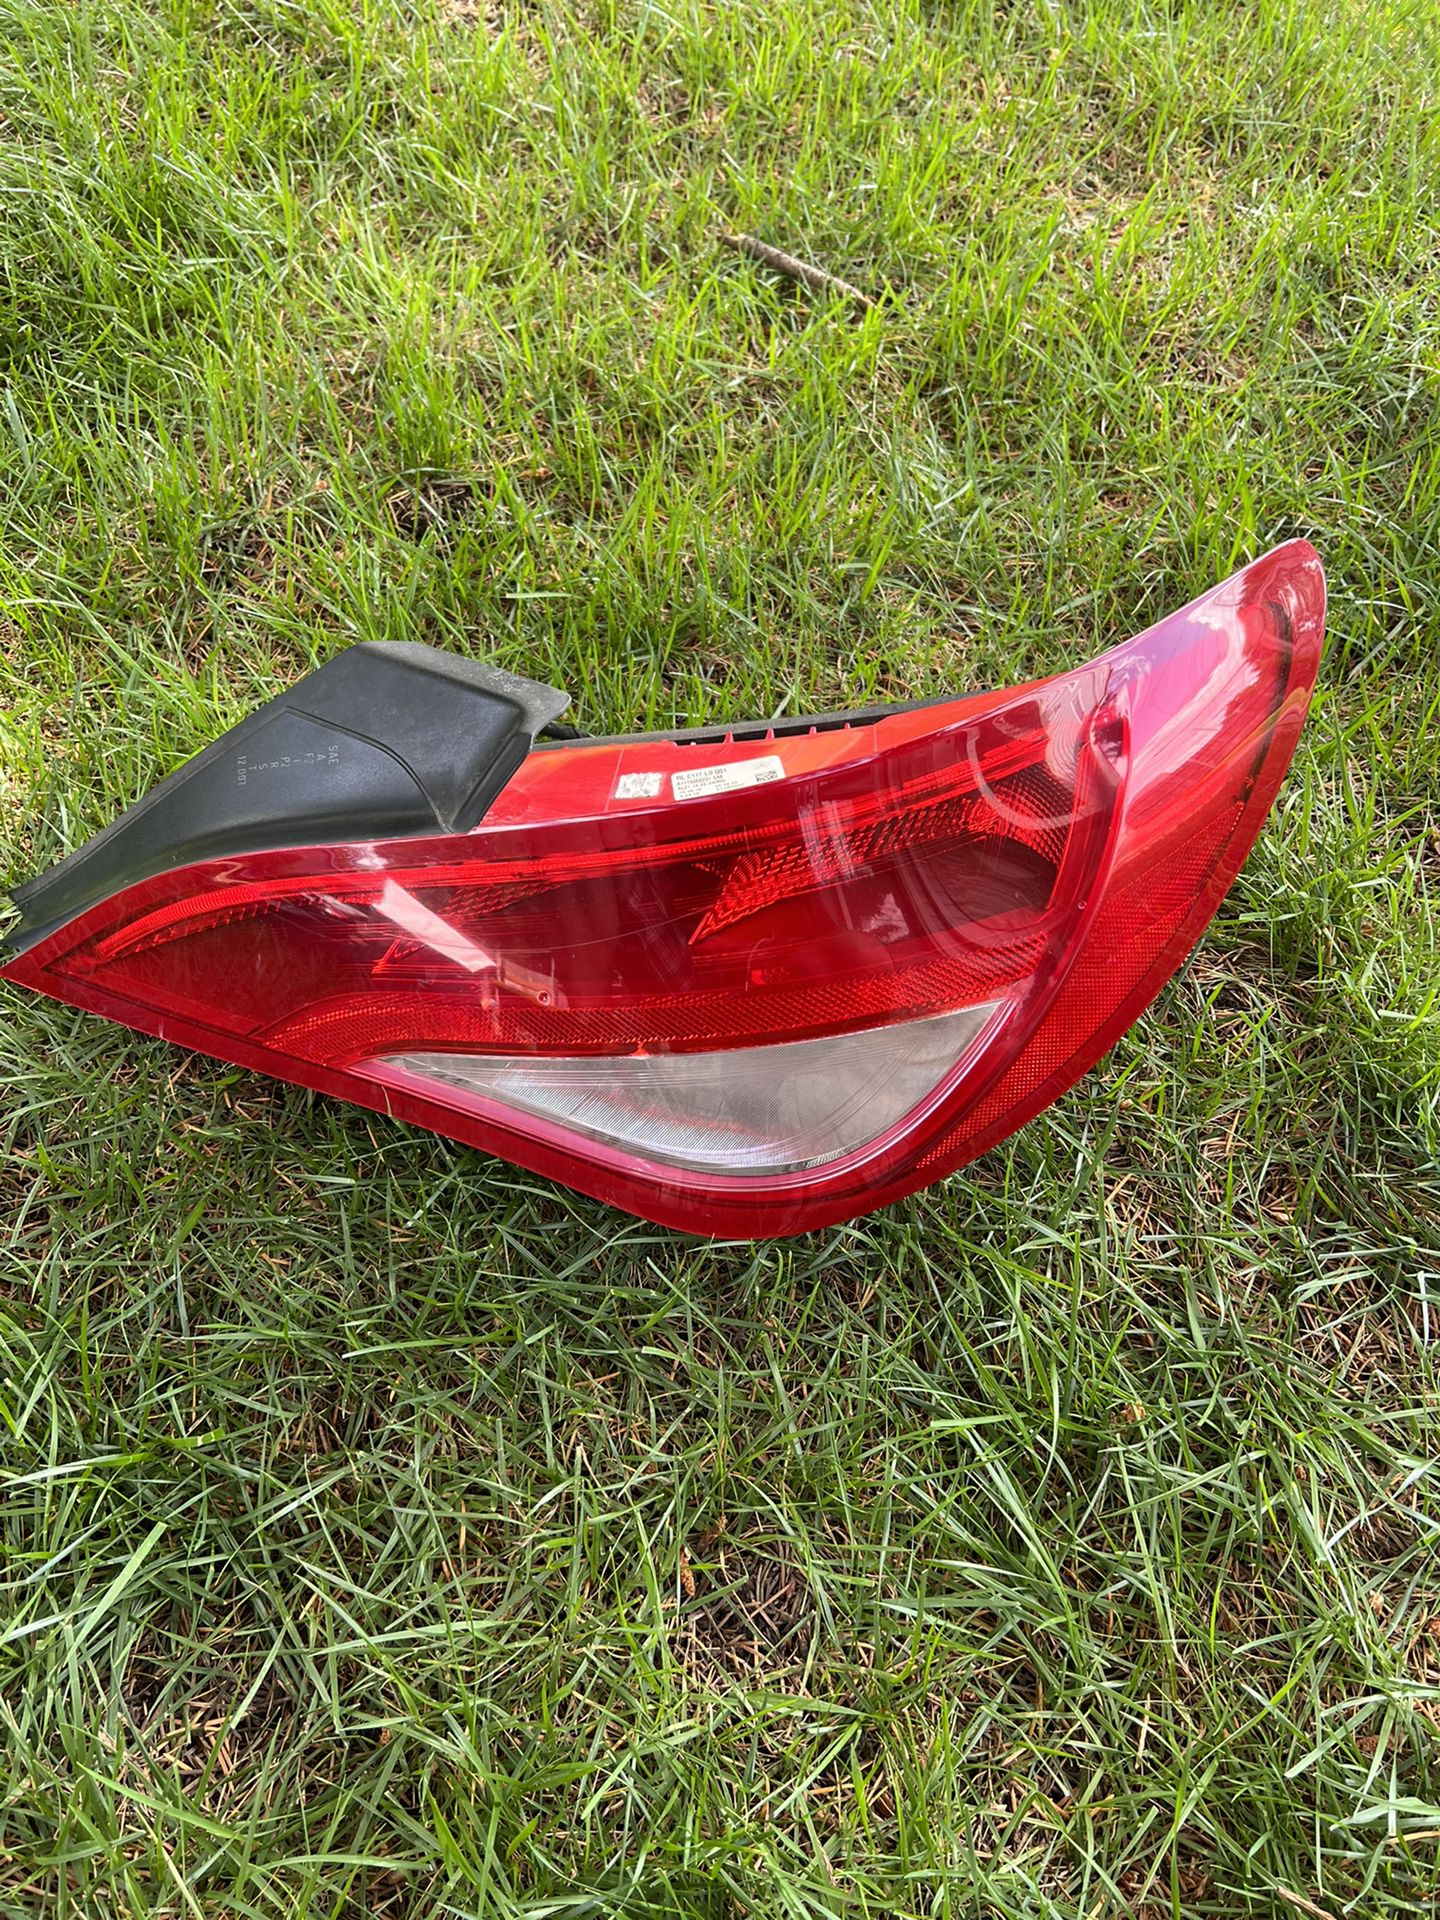 Rear Right Light For Mercedes Benz CLA (contact info removed)-2019